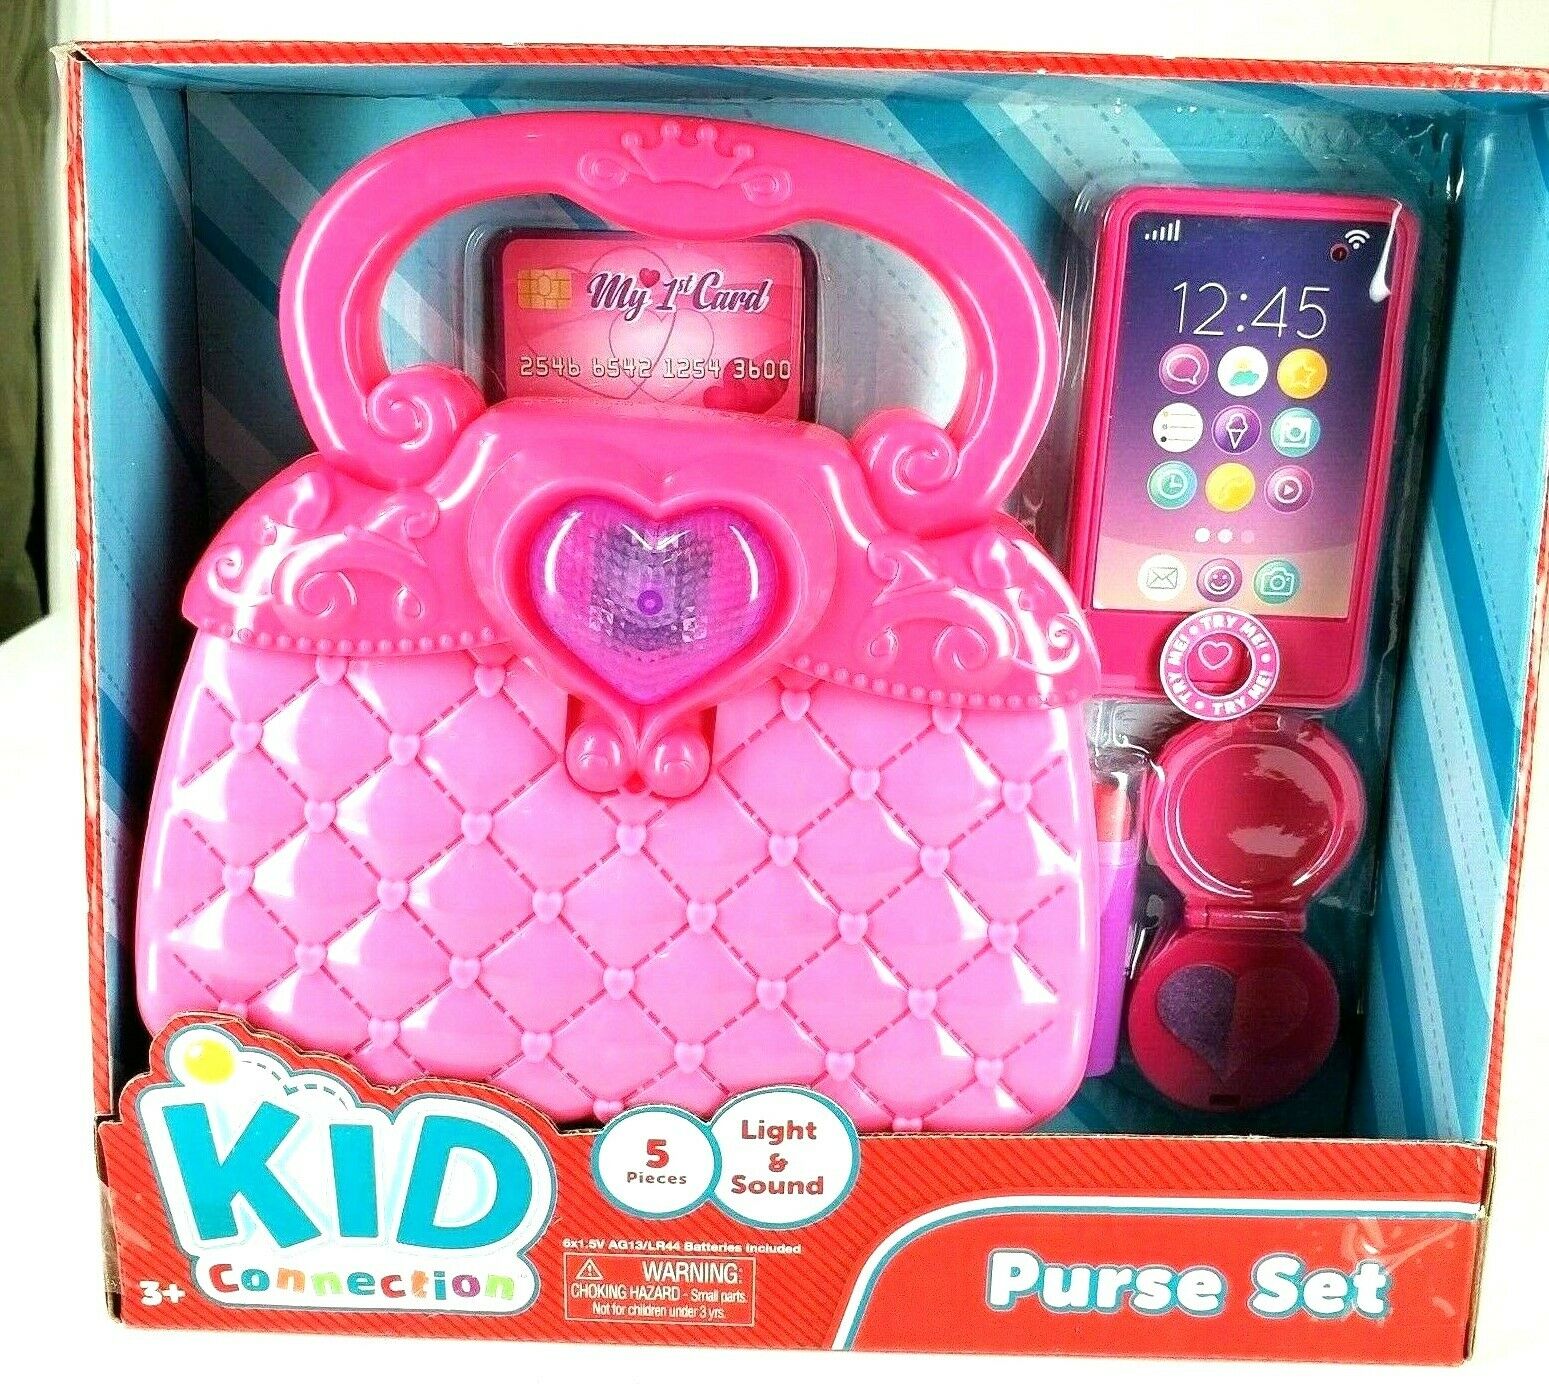 Kid Connection Purse Set 5 Piece Light & Sound Recommended Ages 3+ New Sealed